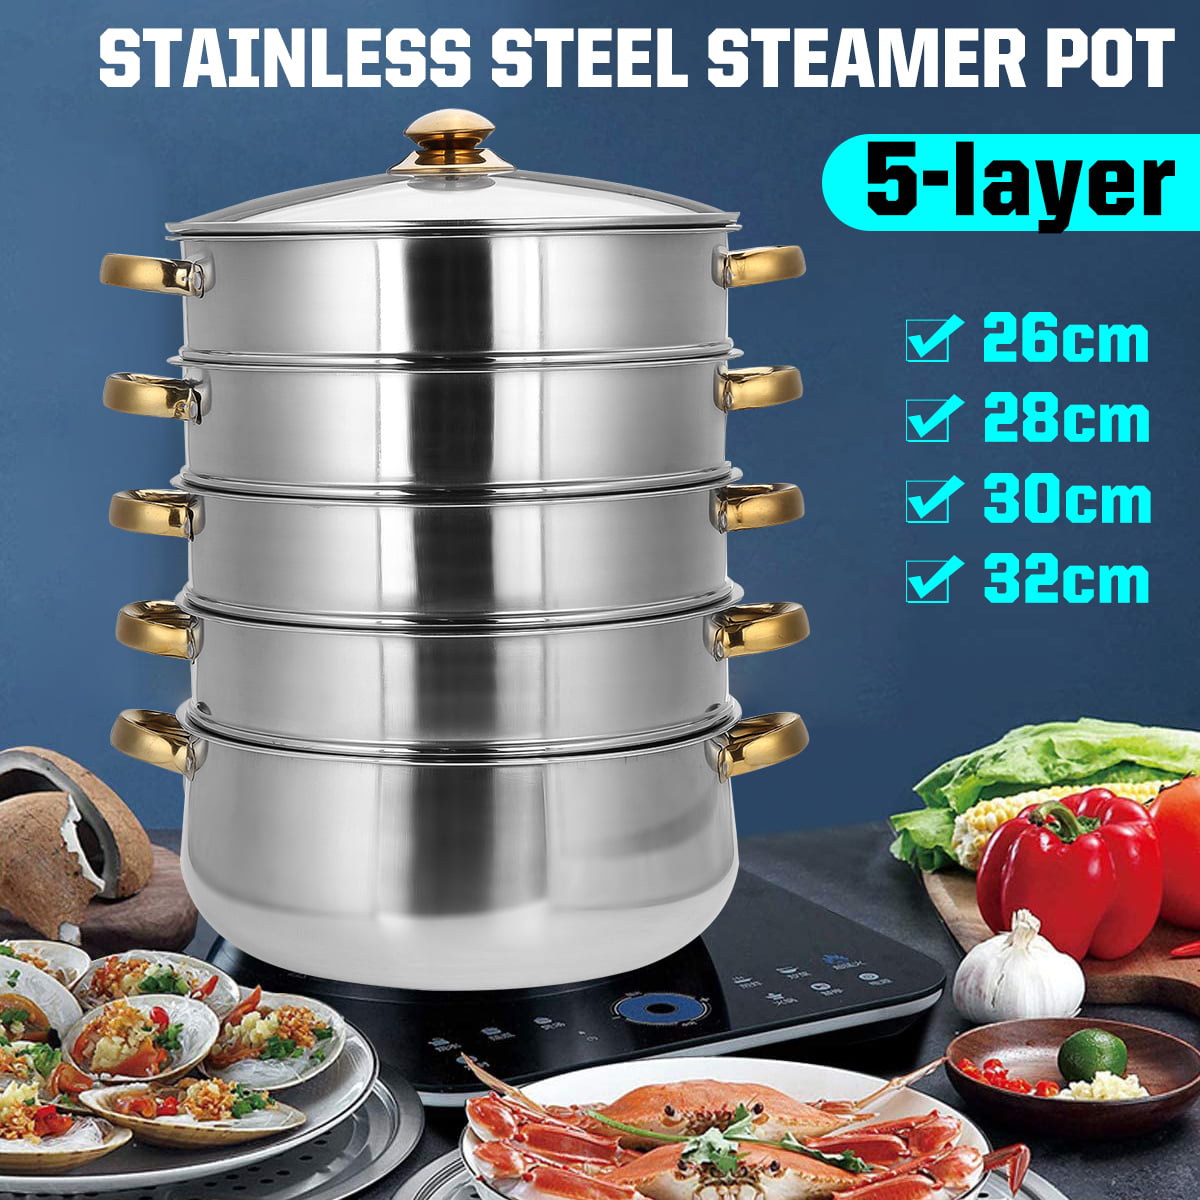 20cm/24cm Stainless Steel Steamer Cooker Pot Set 2/3Tier Pan Cook Food Induction 